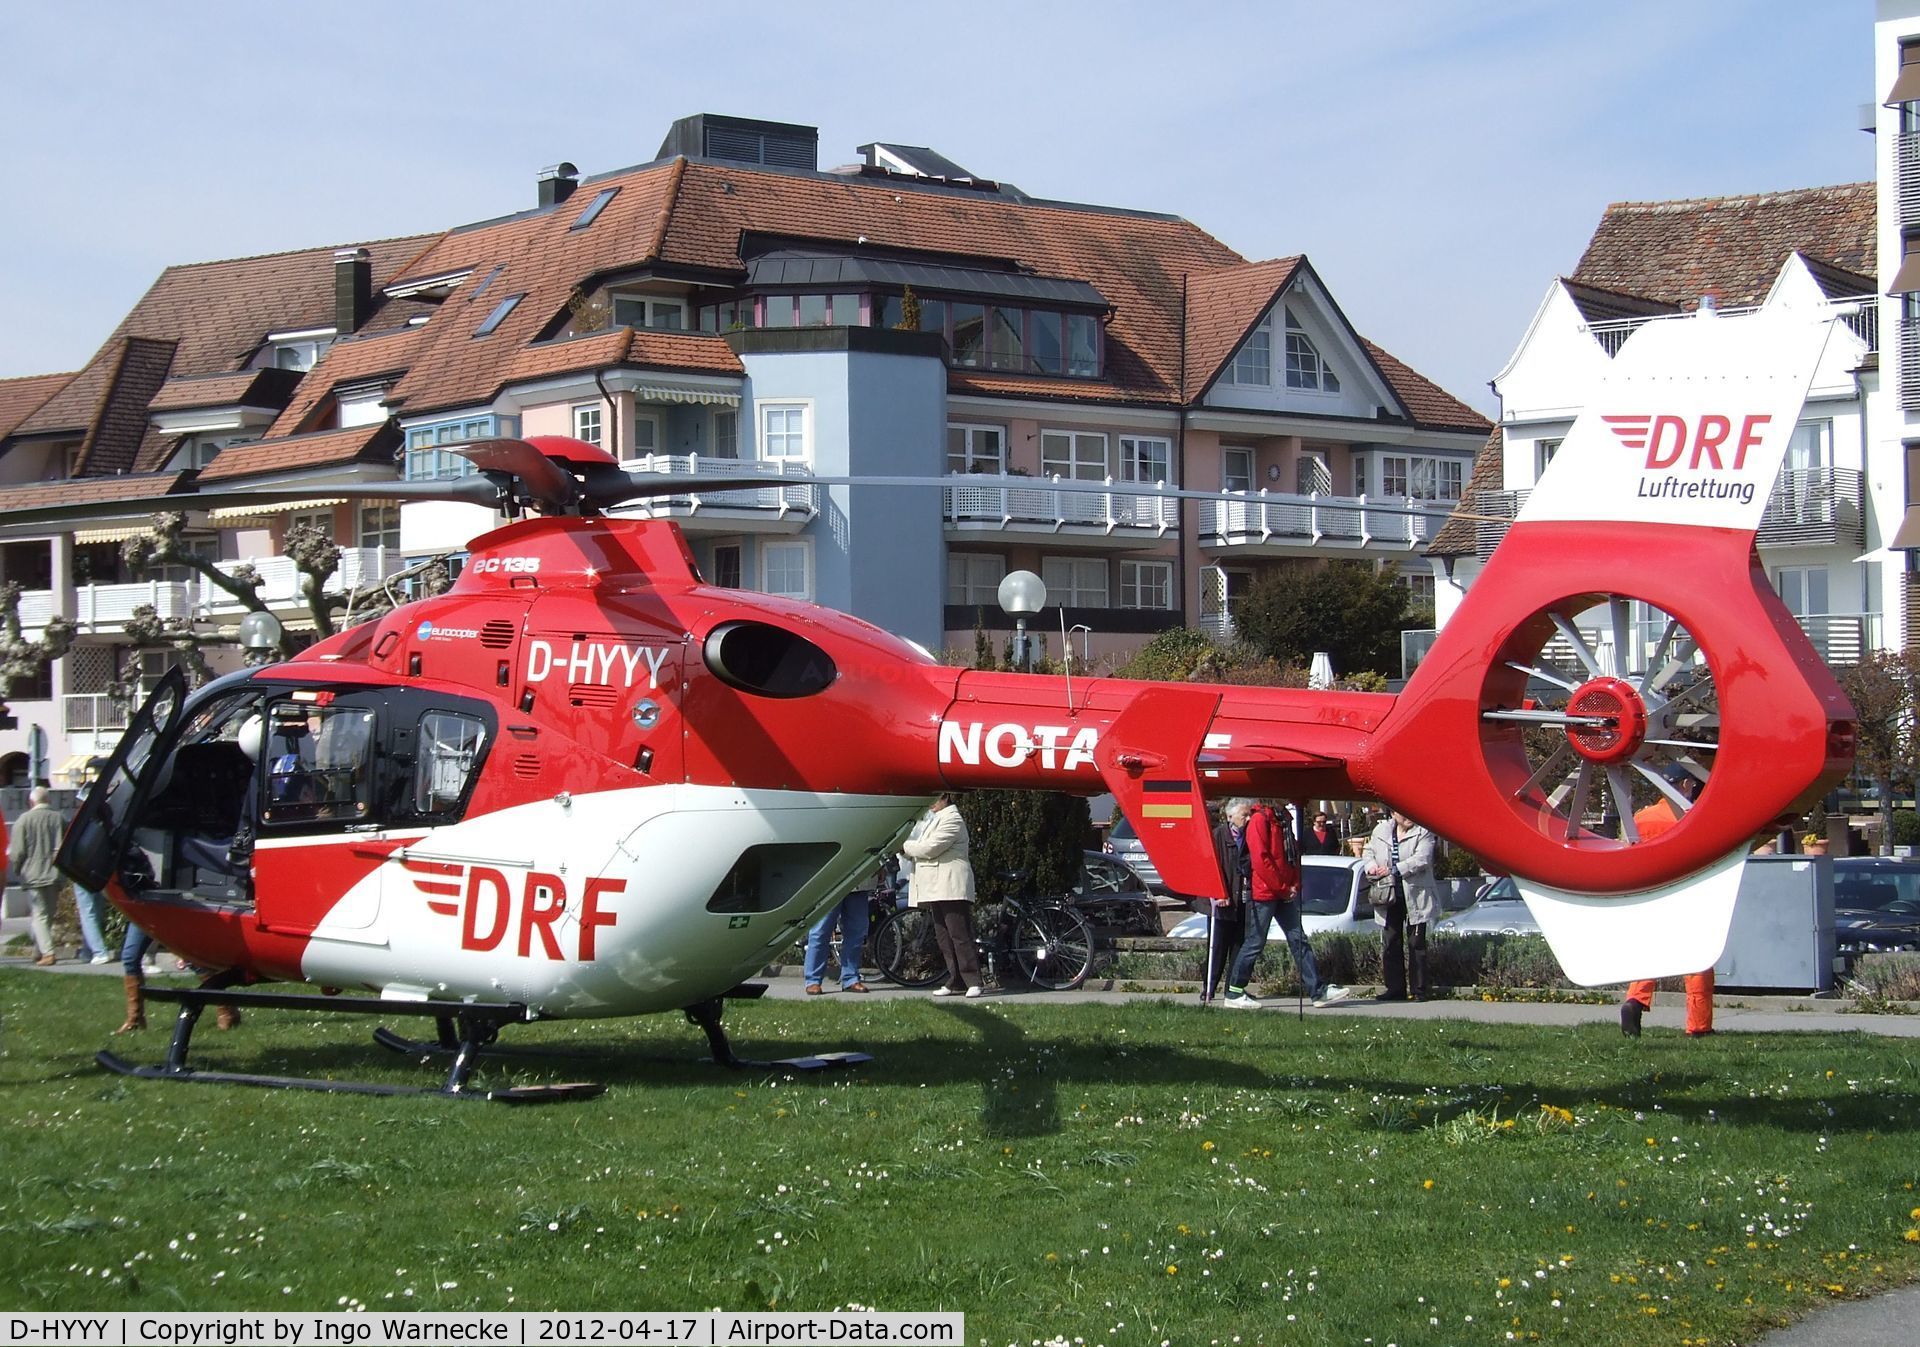 D-HYYY, Eurocopter EC-135P-1 C/N 1030, Eurocopter EC135P2+ EMS-helicopter of the DRS-Luftrettung at the lakeside park in Langenargen on the shores of Lake Constance (Bodensee) for an informational display for emergency personnel